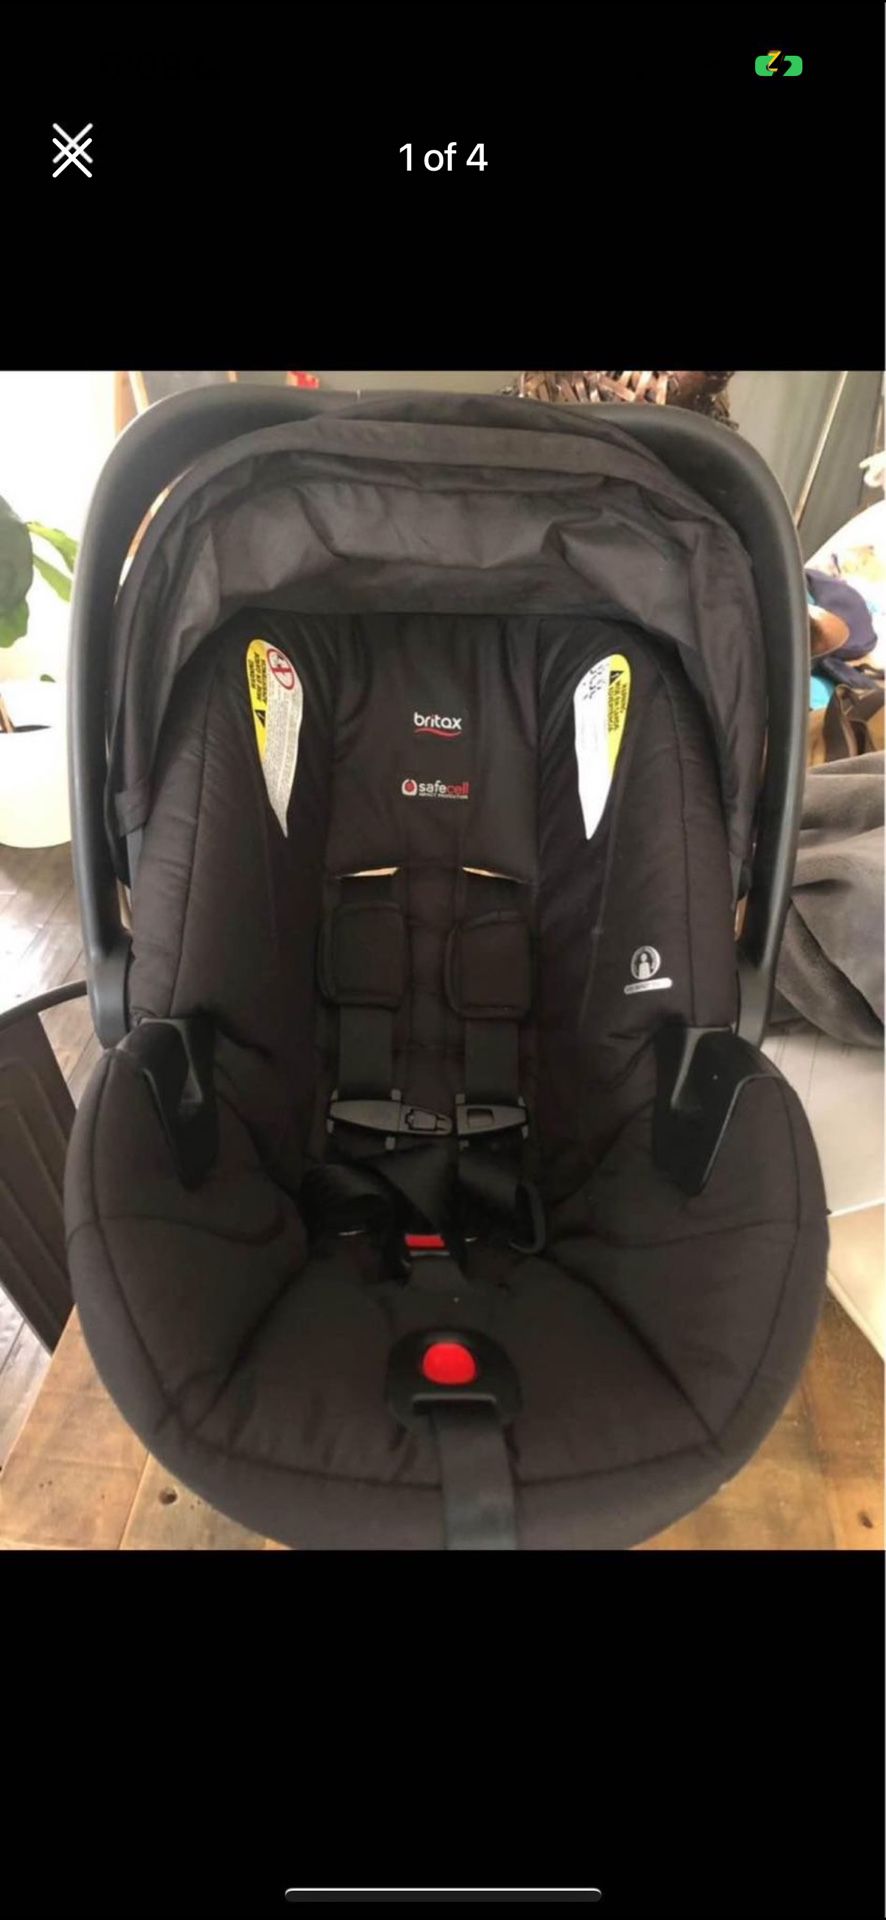 Britax B-Safe 35 Infant Car Seat with Base